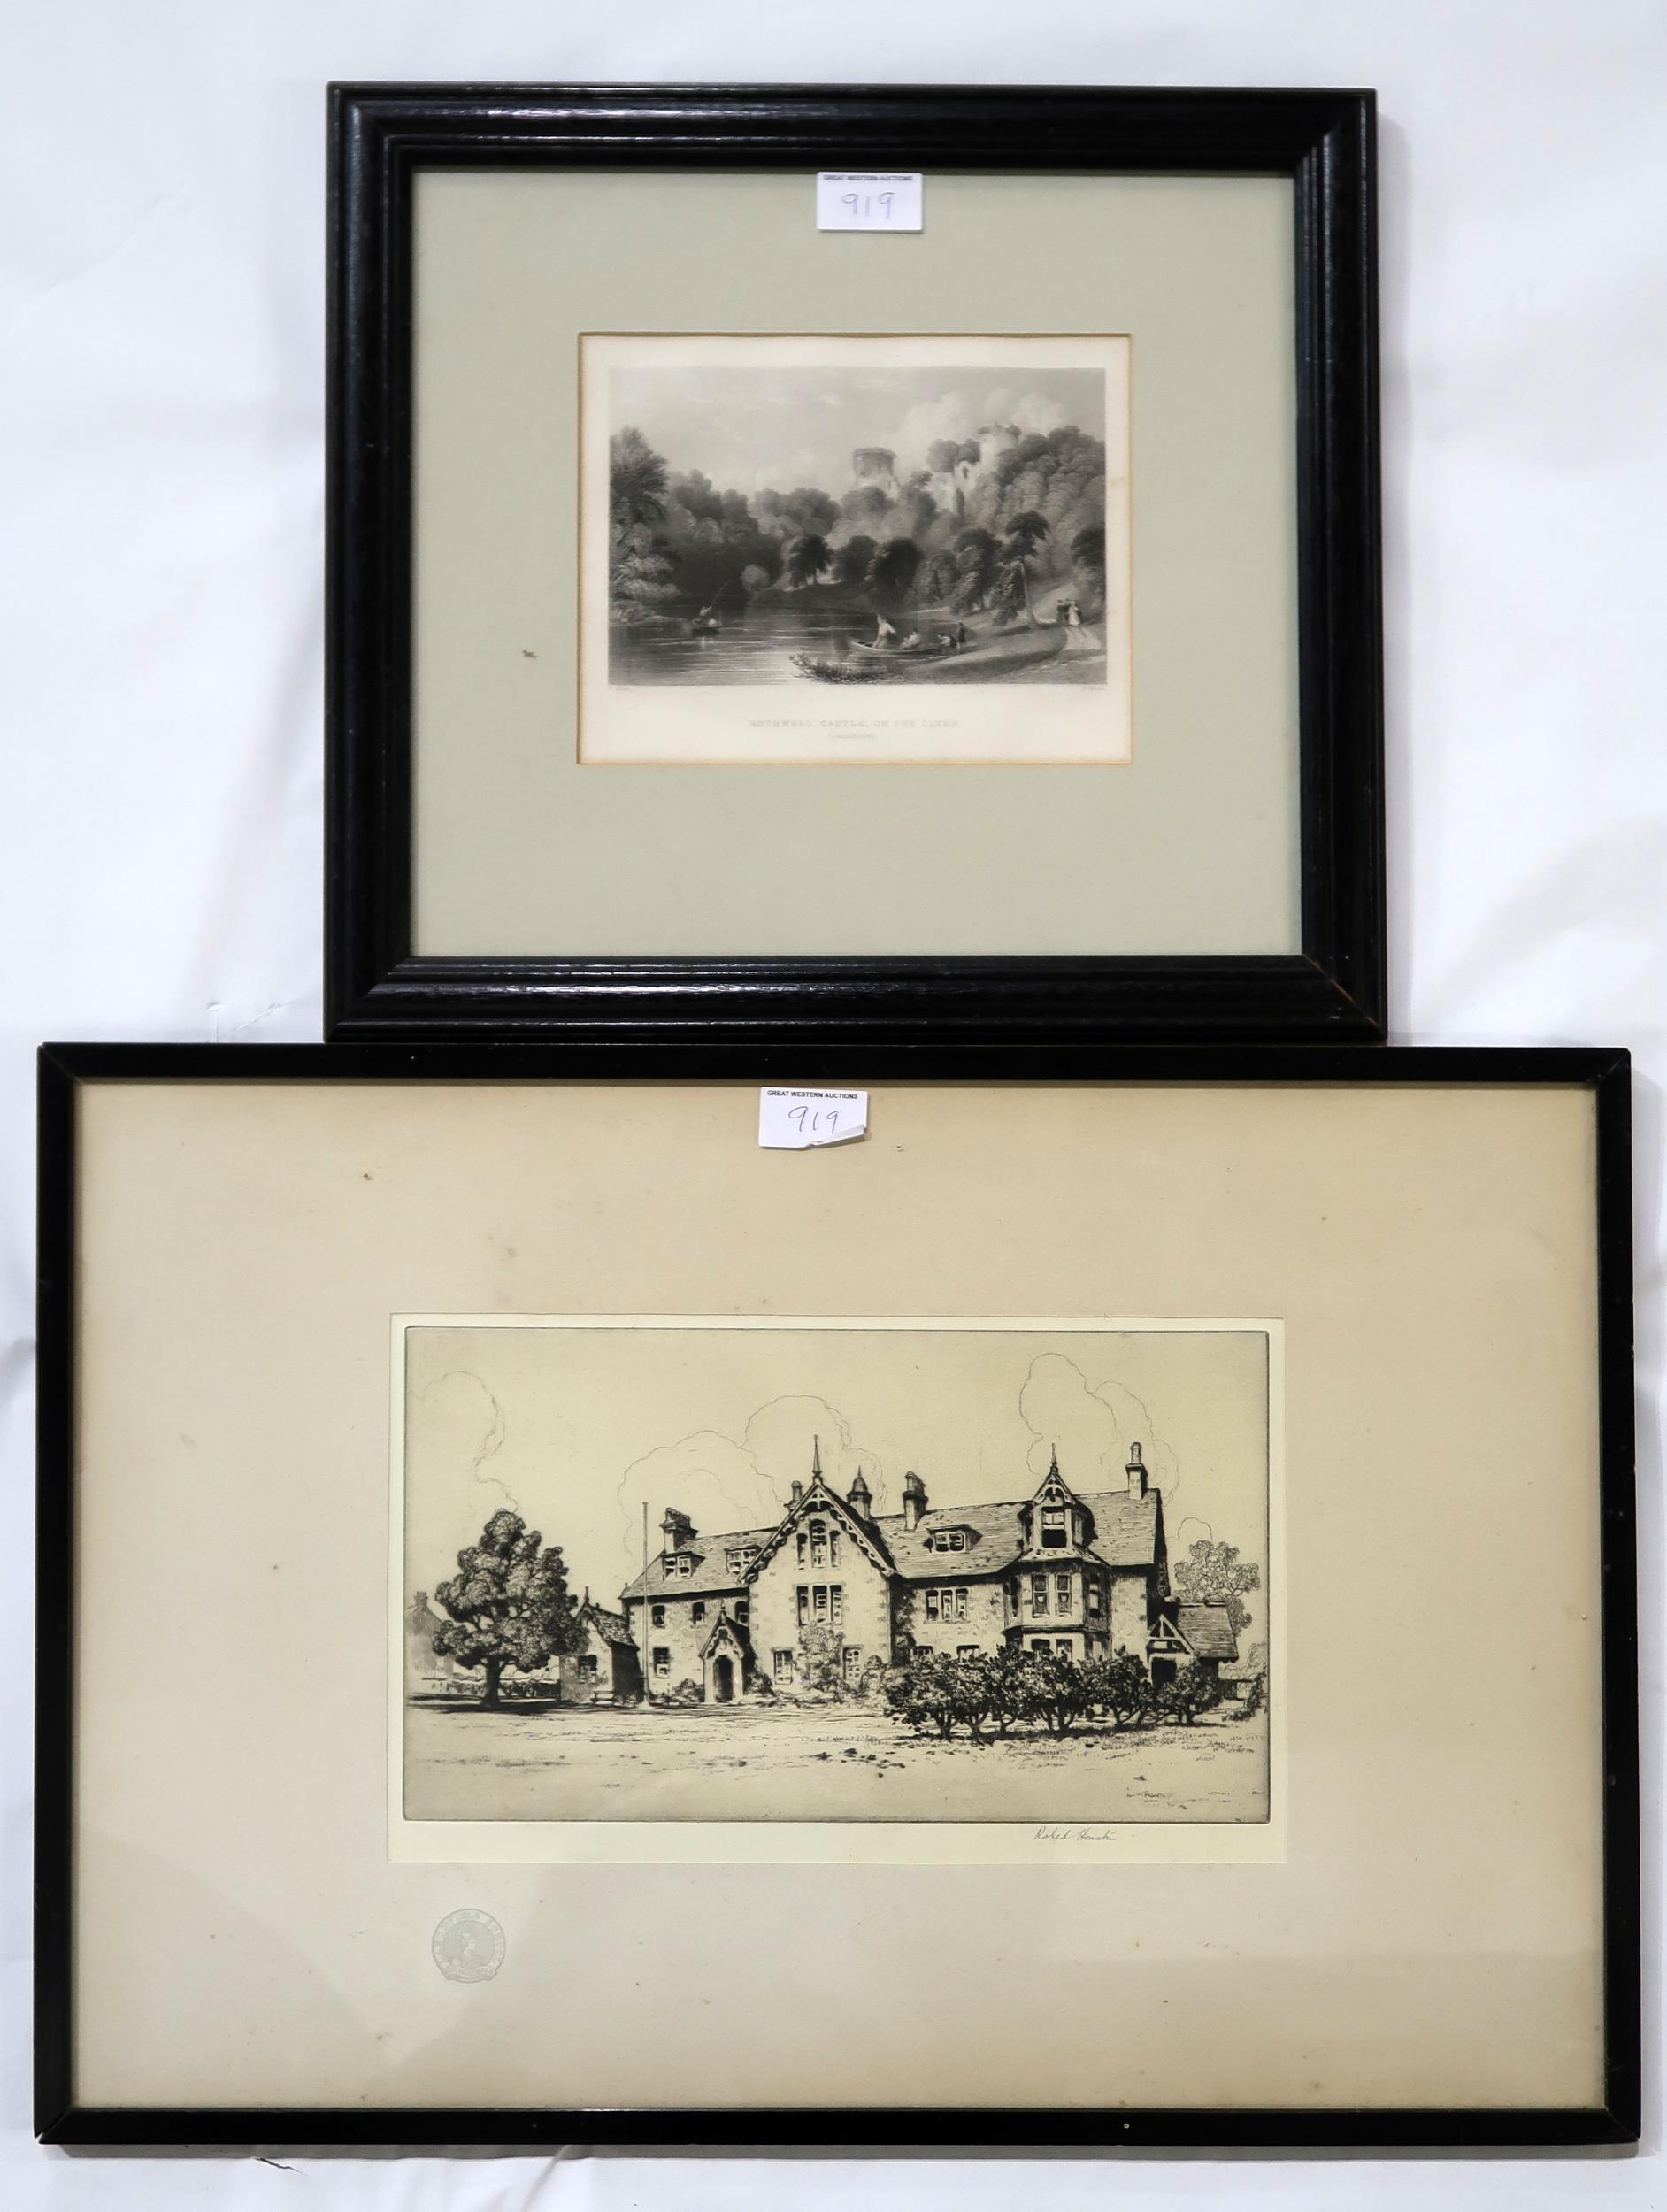 ROBERT HOUSTON Larchfield School, signed, etching, 19 x 32cm,WILLIAM WALCOT Venice, signed, - Image 5 of 5